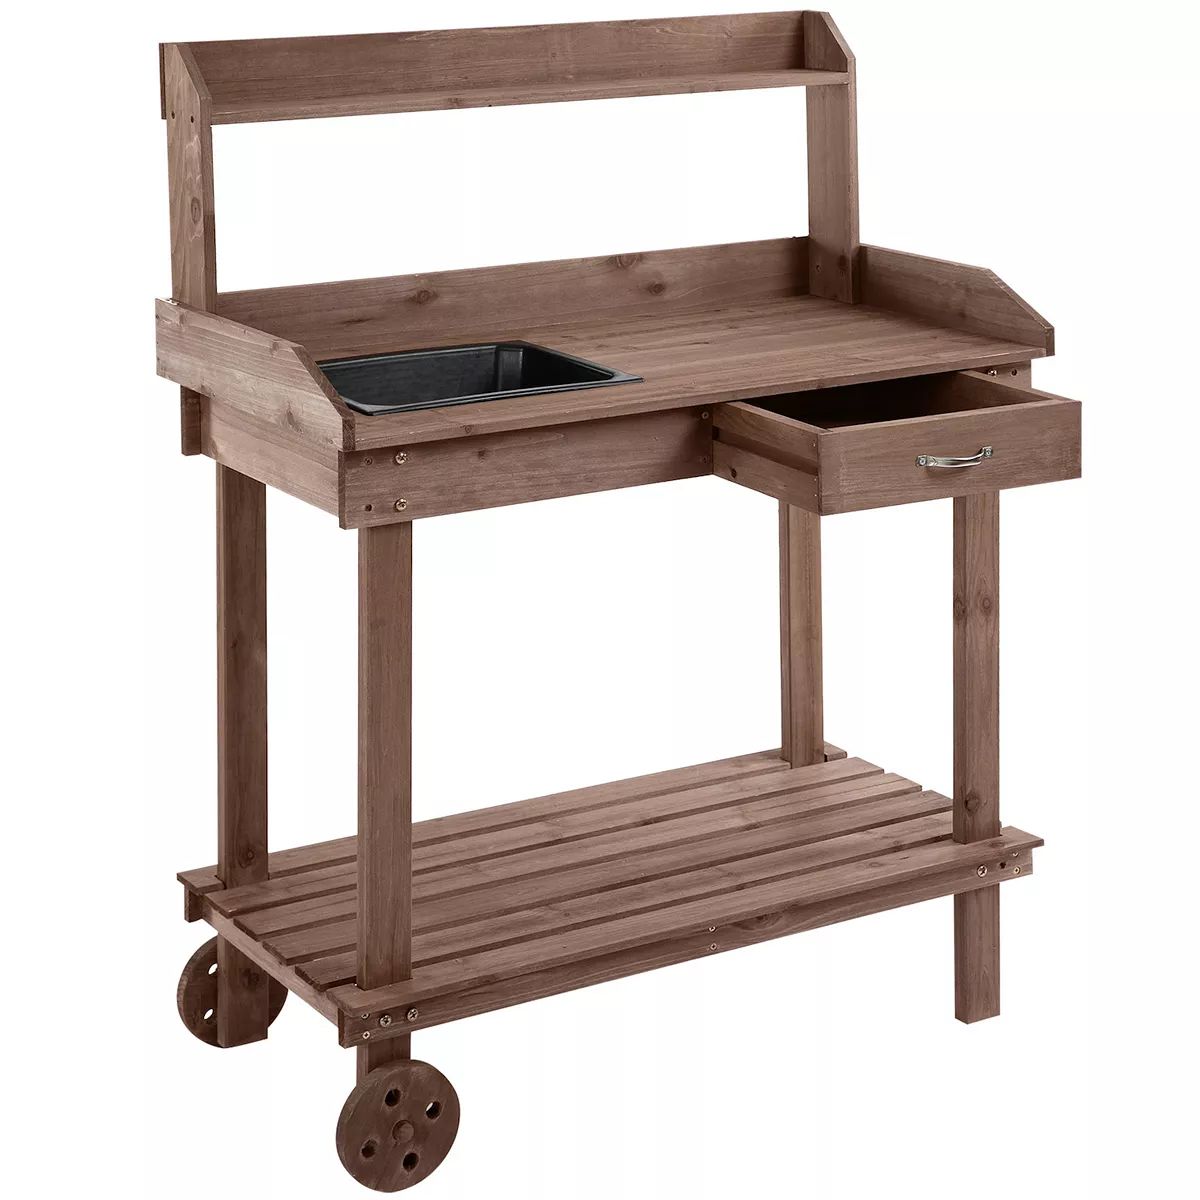 Outdoor Wood Planting Workstation Potting Bench Table W/ Large Storage Spaces | Kohl's